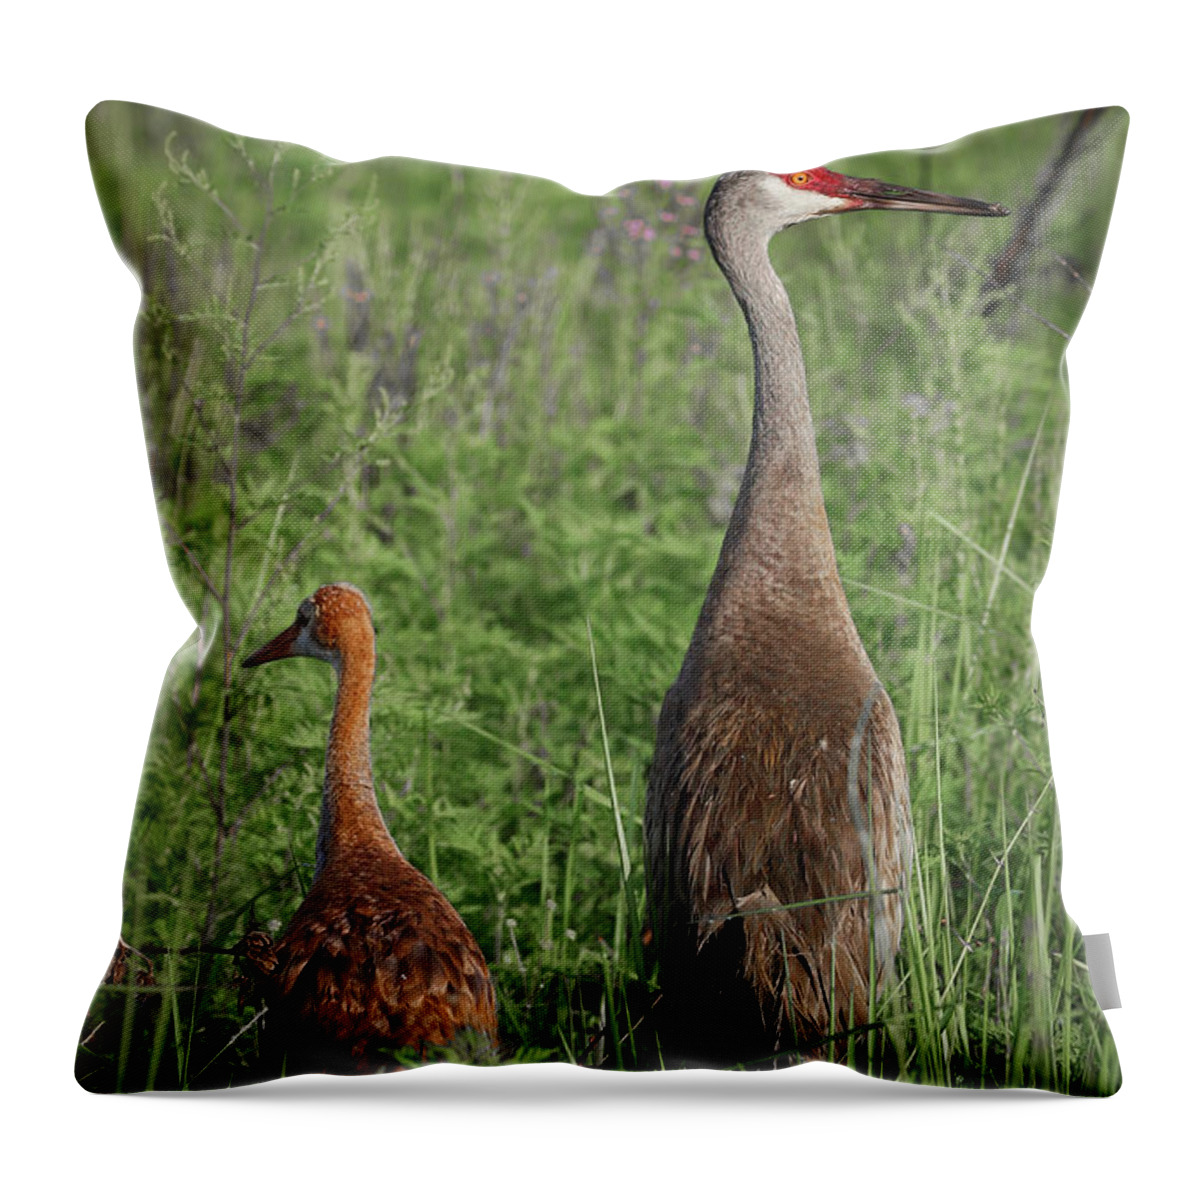 Bird Throw Pillow featuring the photograph Young and Adult Sandhills by Tom Claud